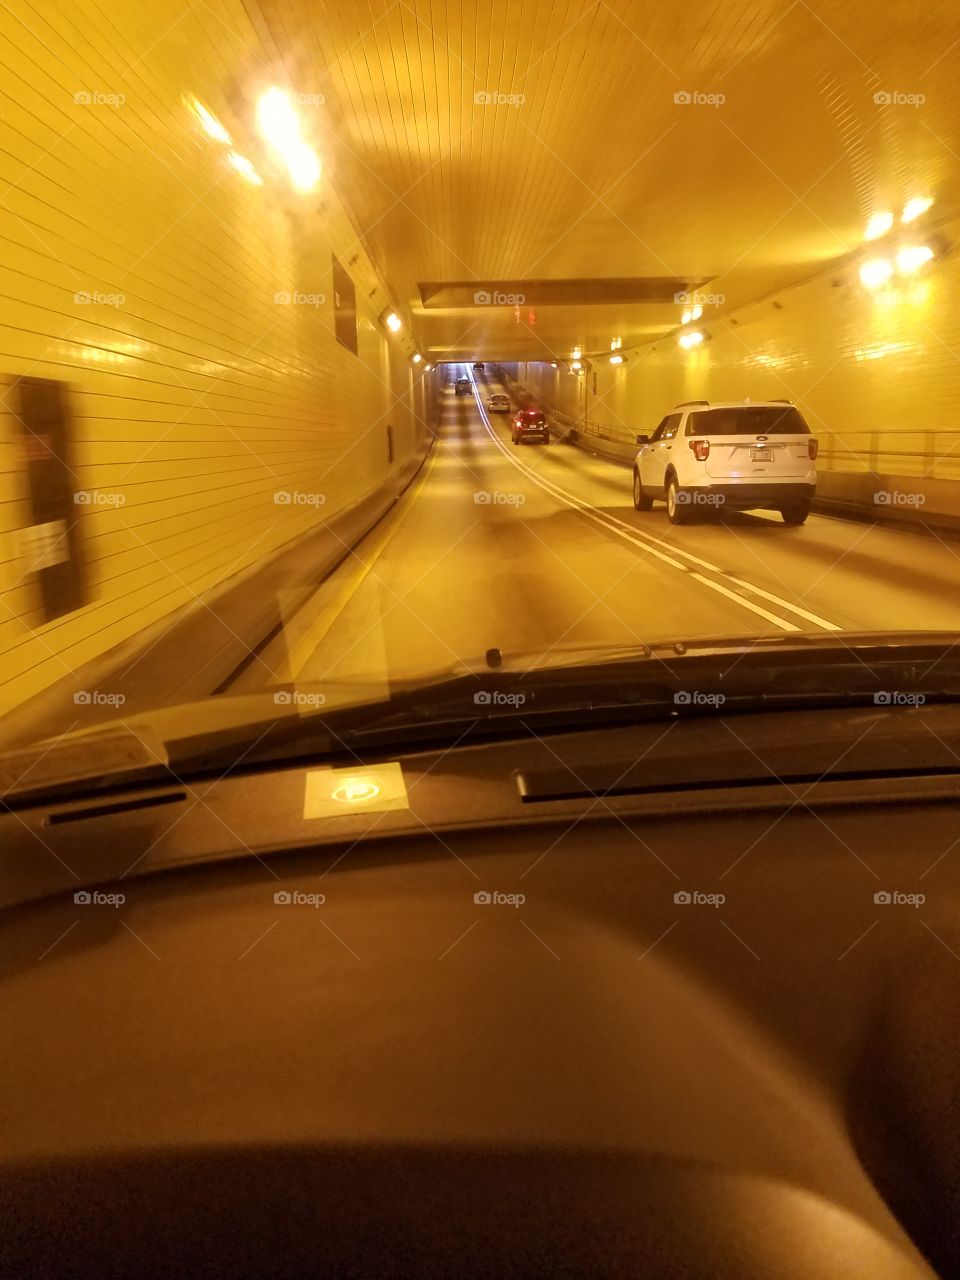 Inside the tunnel